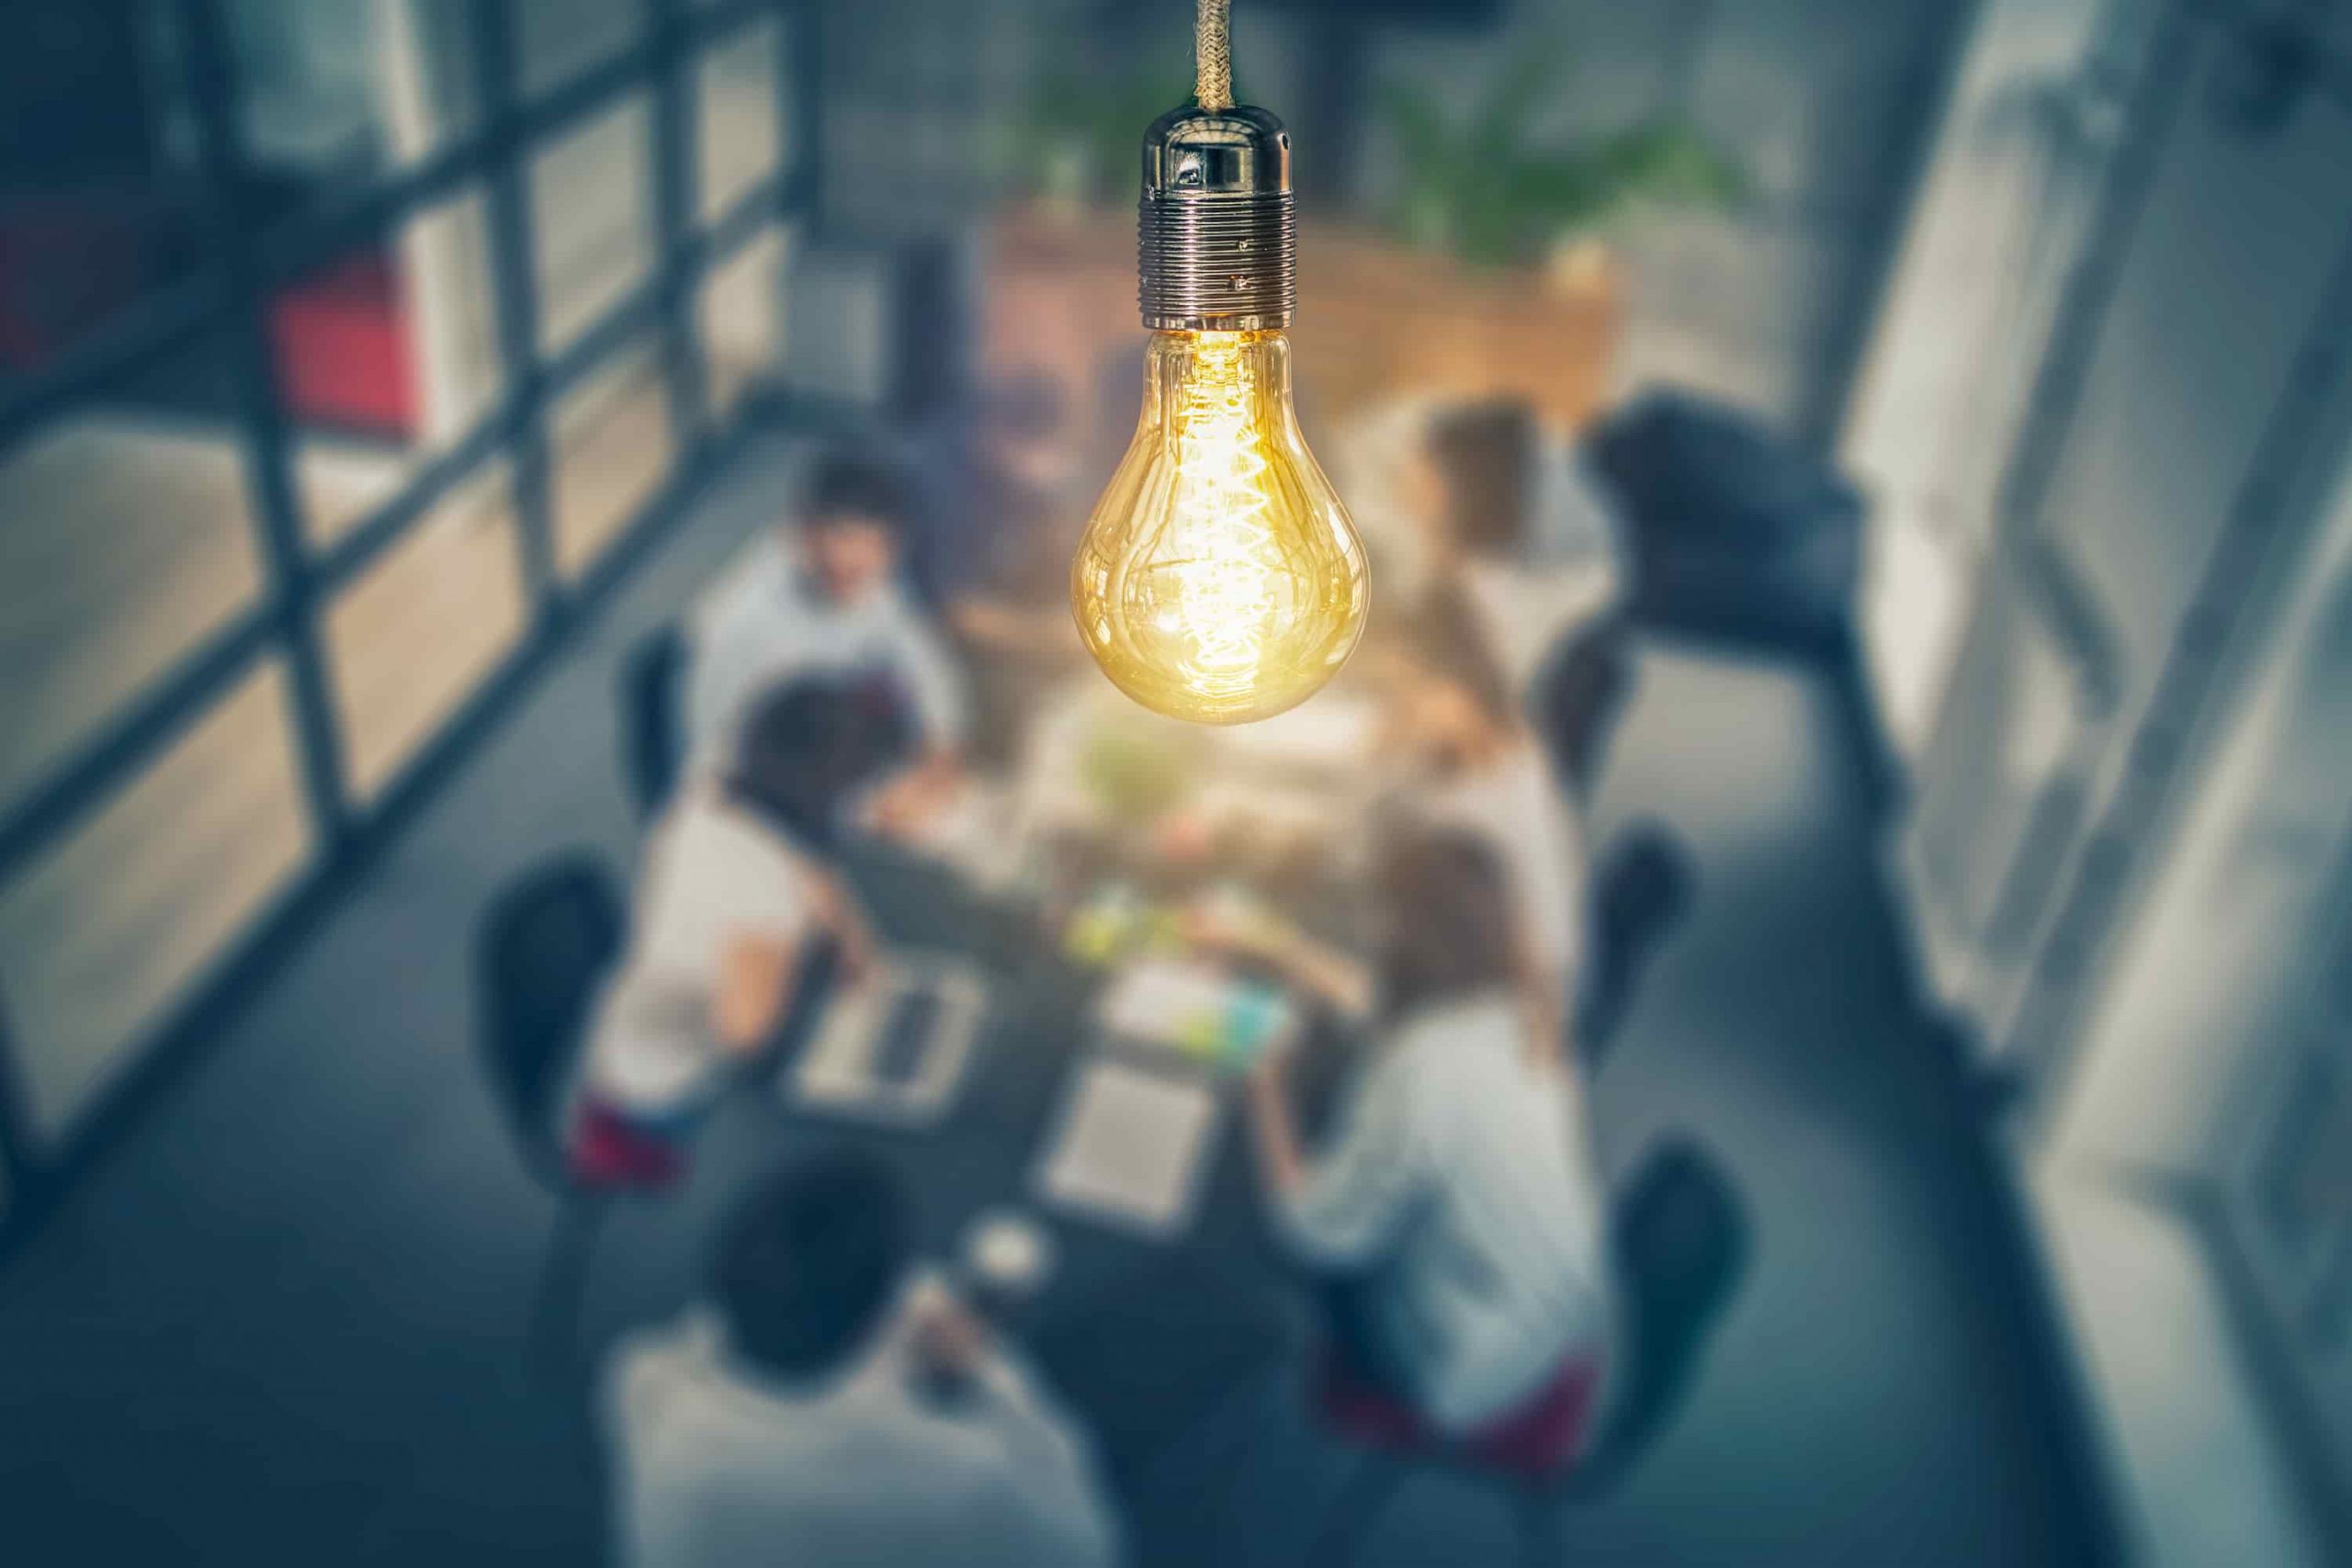 A group of people discussing something with a light bulb as the focus point